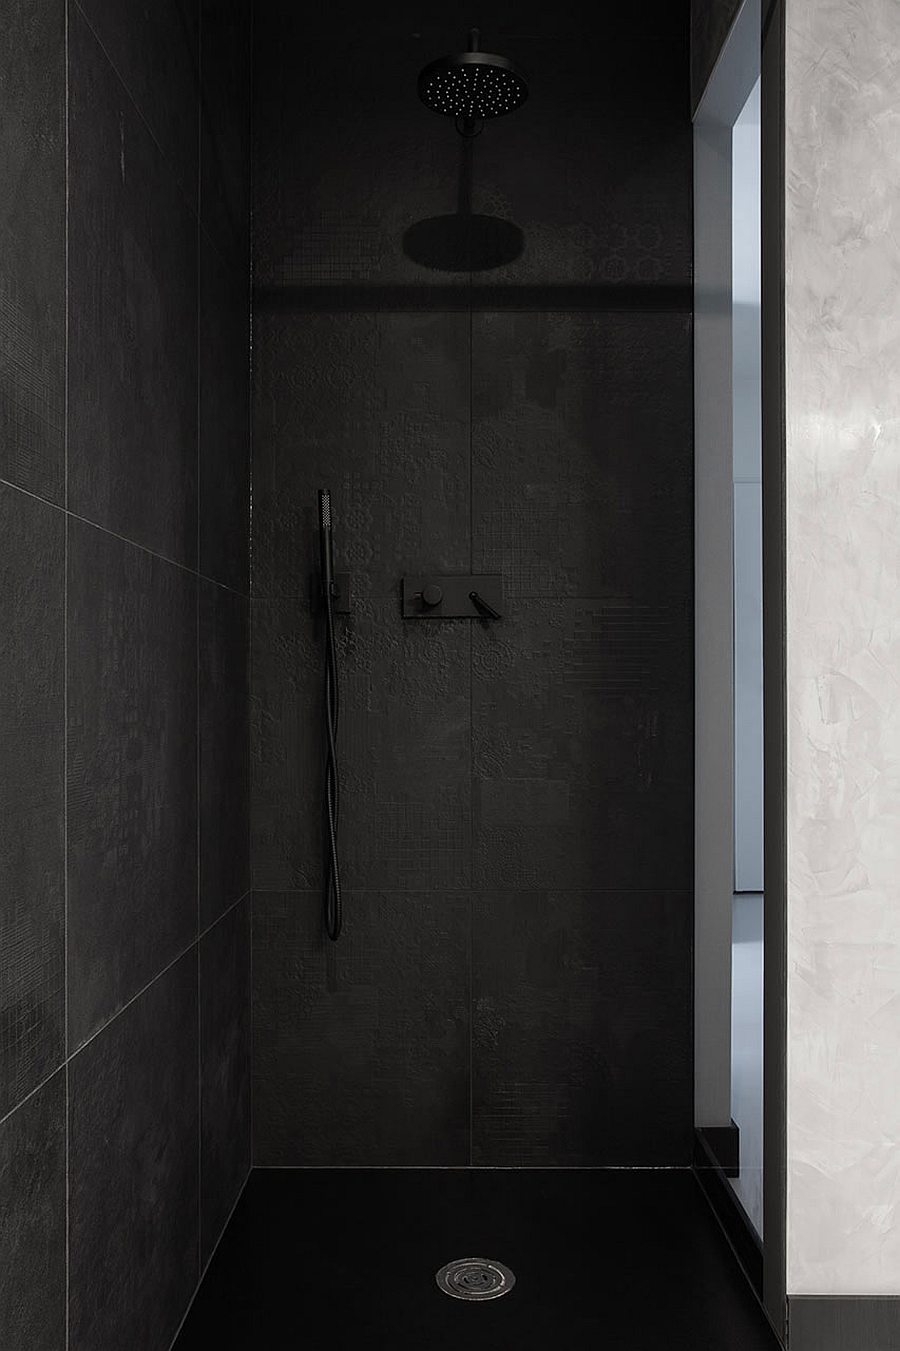 Stylish shower area clad in black tiles